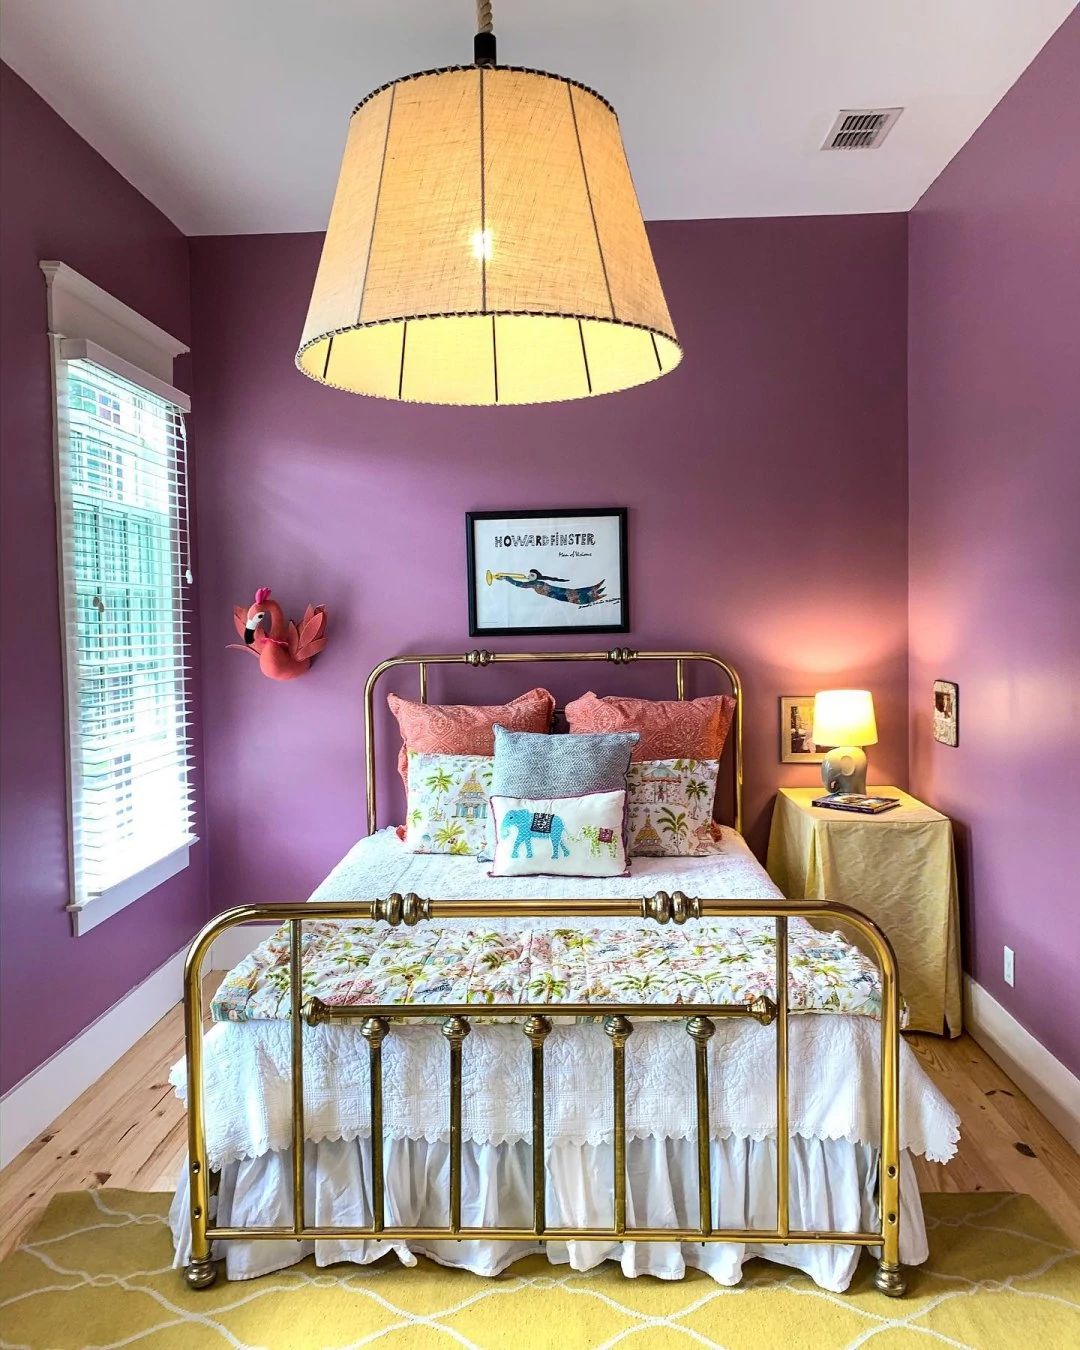 A bedroom painted Thistle SW 6283 with a brass bed in the middle and a large pendant light overhead.